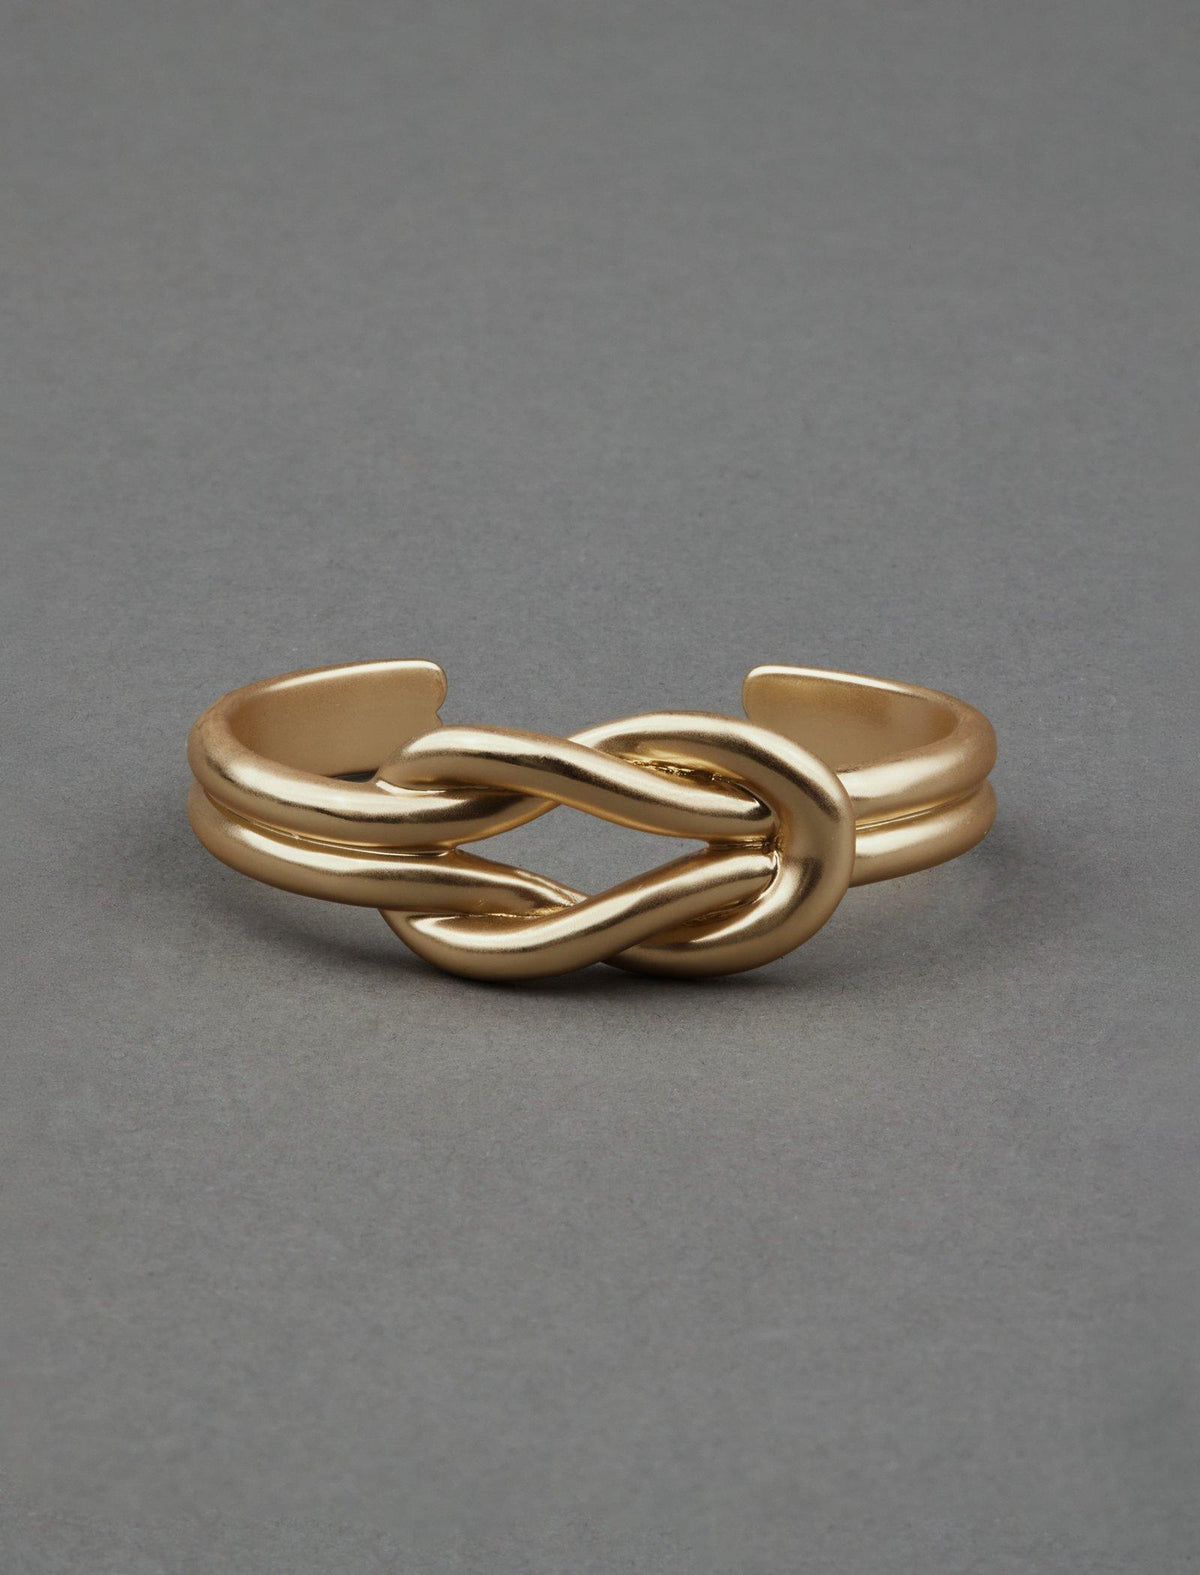 Lucky Brand Knotted Cuff Bracelet - Women's Ladies Accessories Jewelry Bracelets Gold